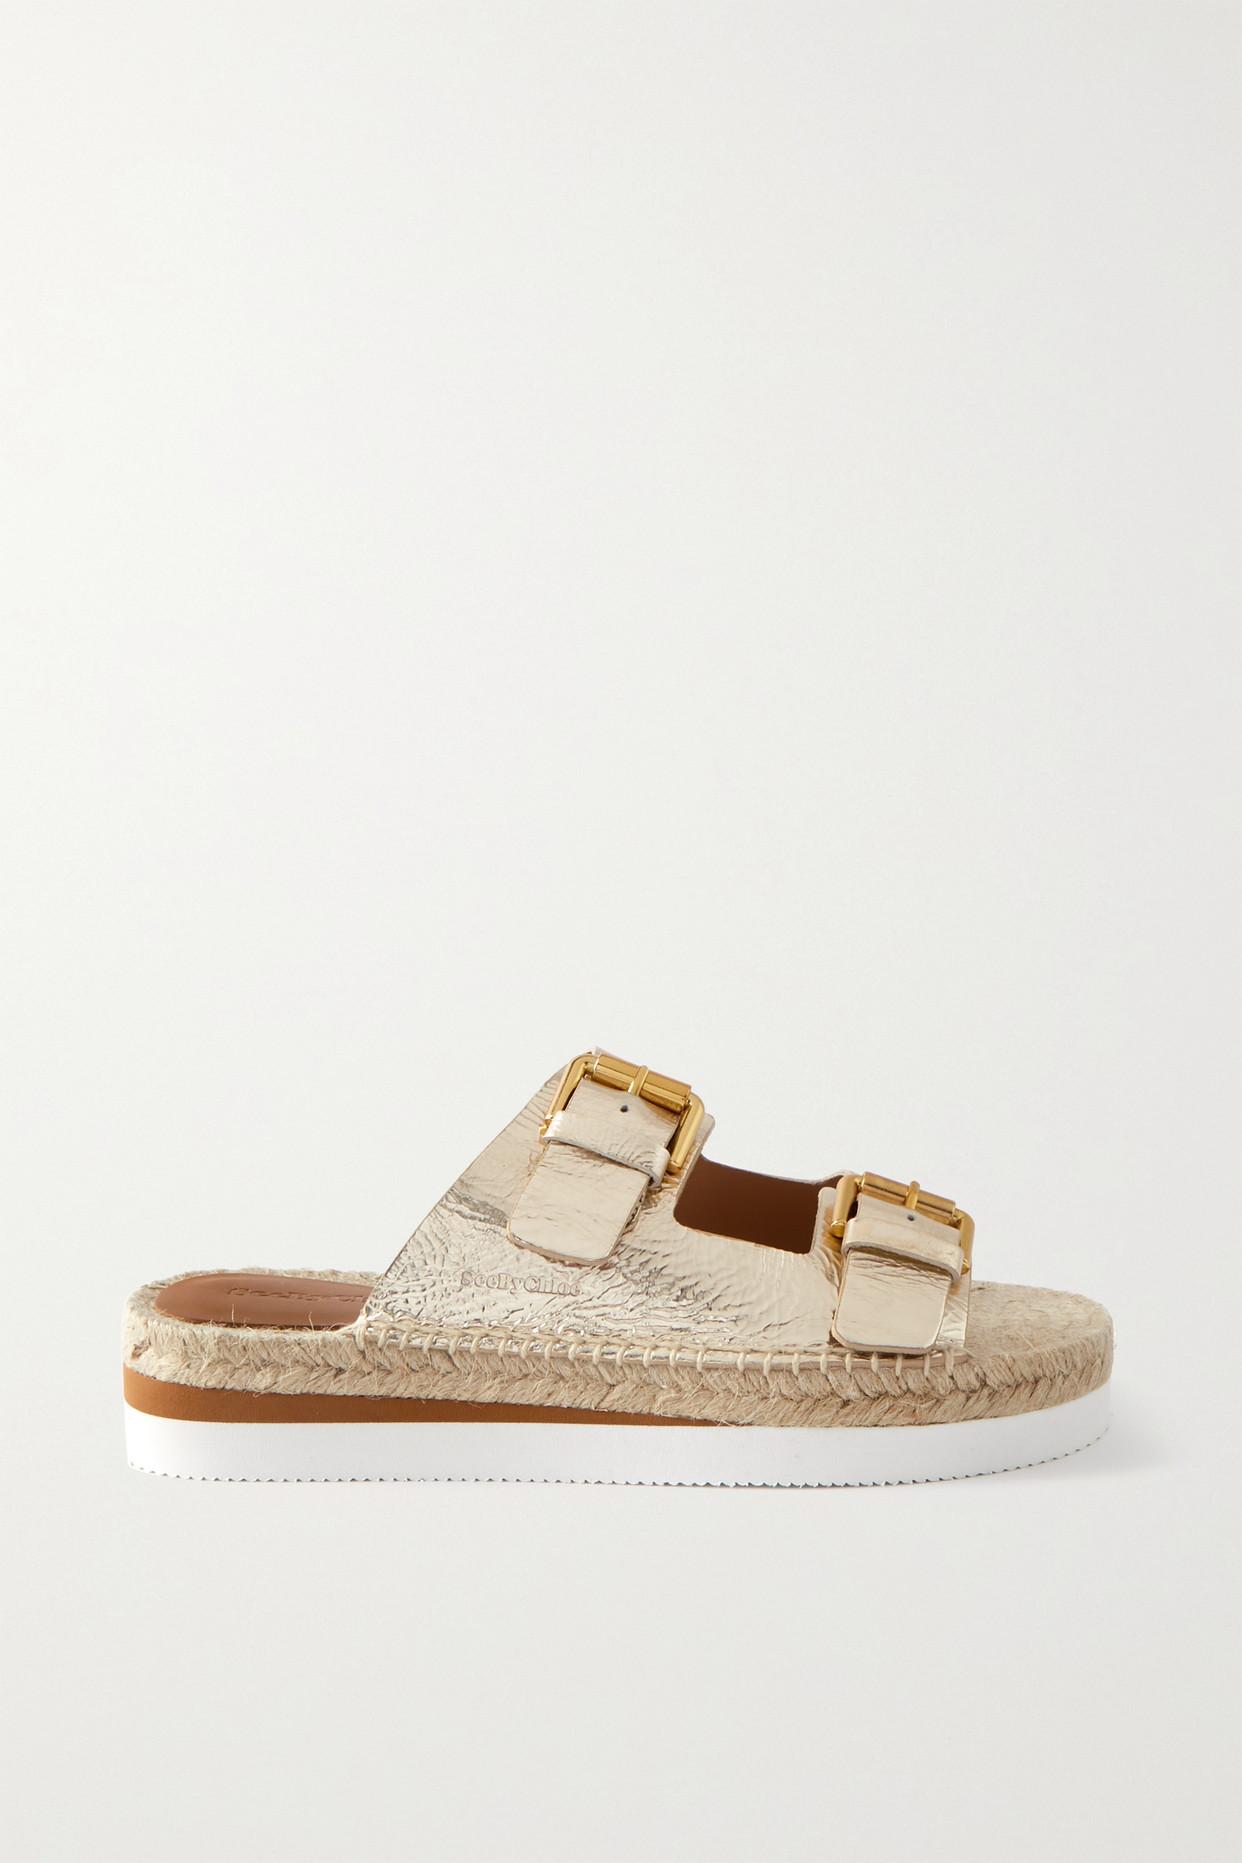 See By Chloé Glyn Metallic Leather Espadrille Platform Slides in Natural |  Lyst